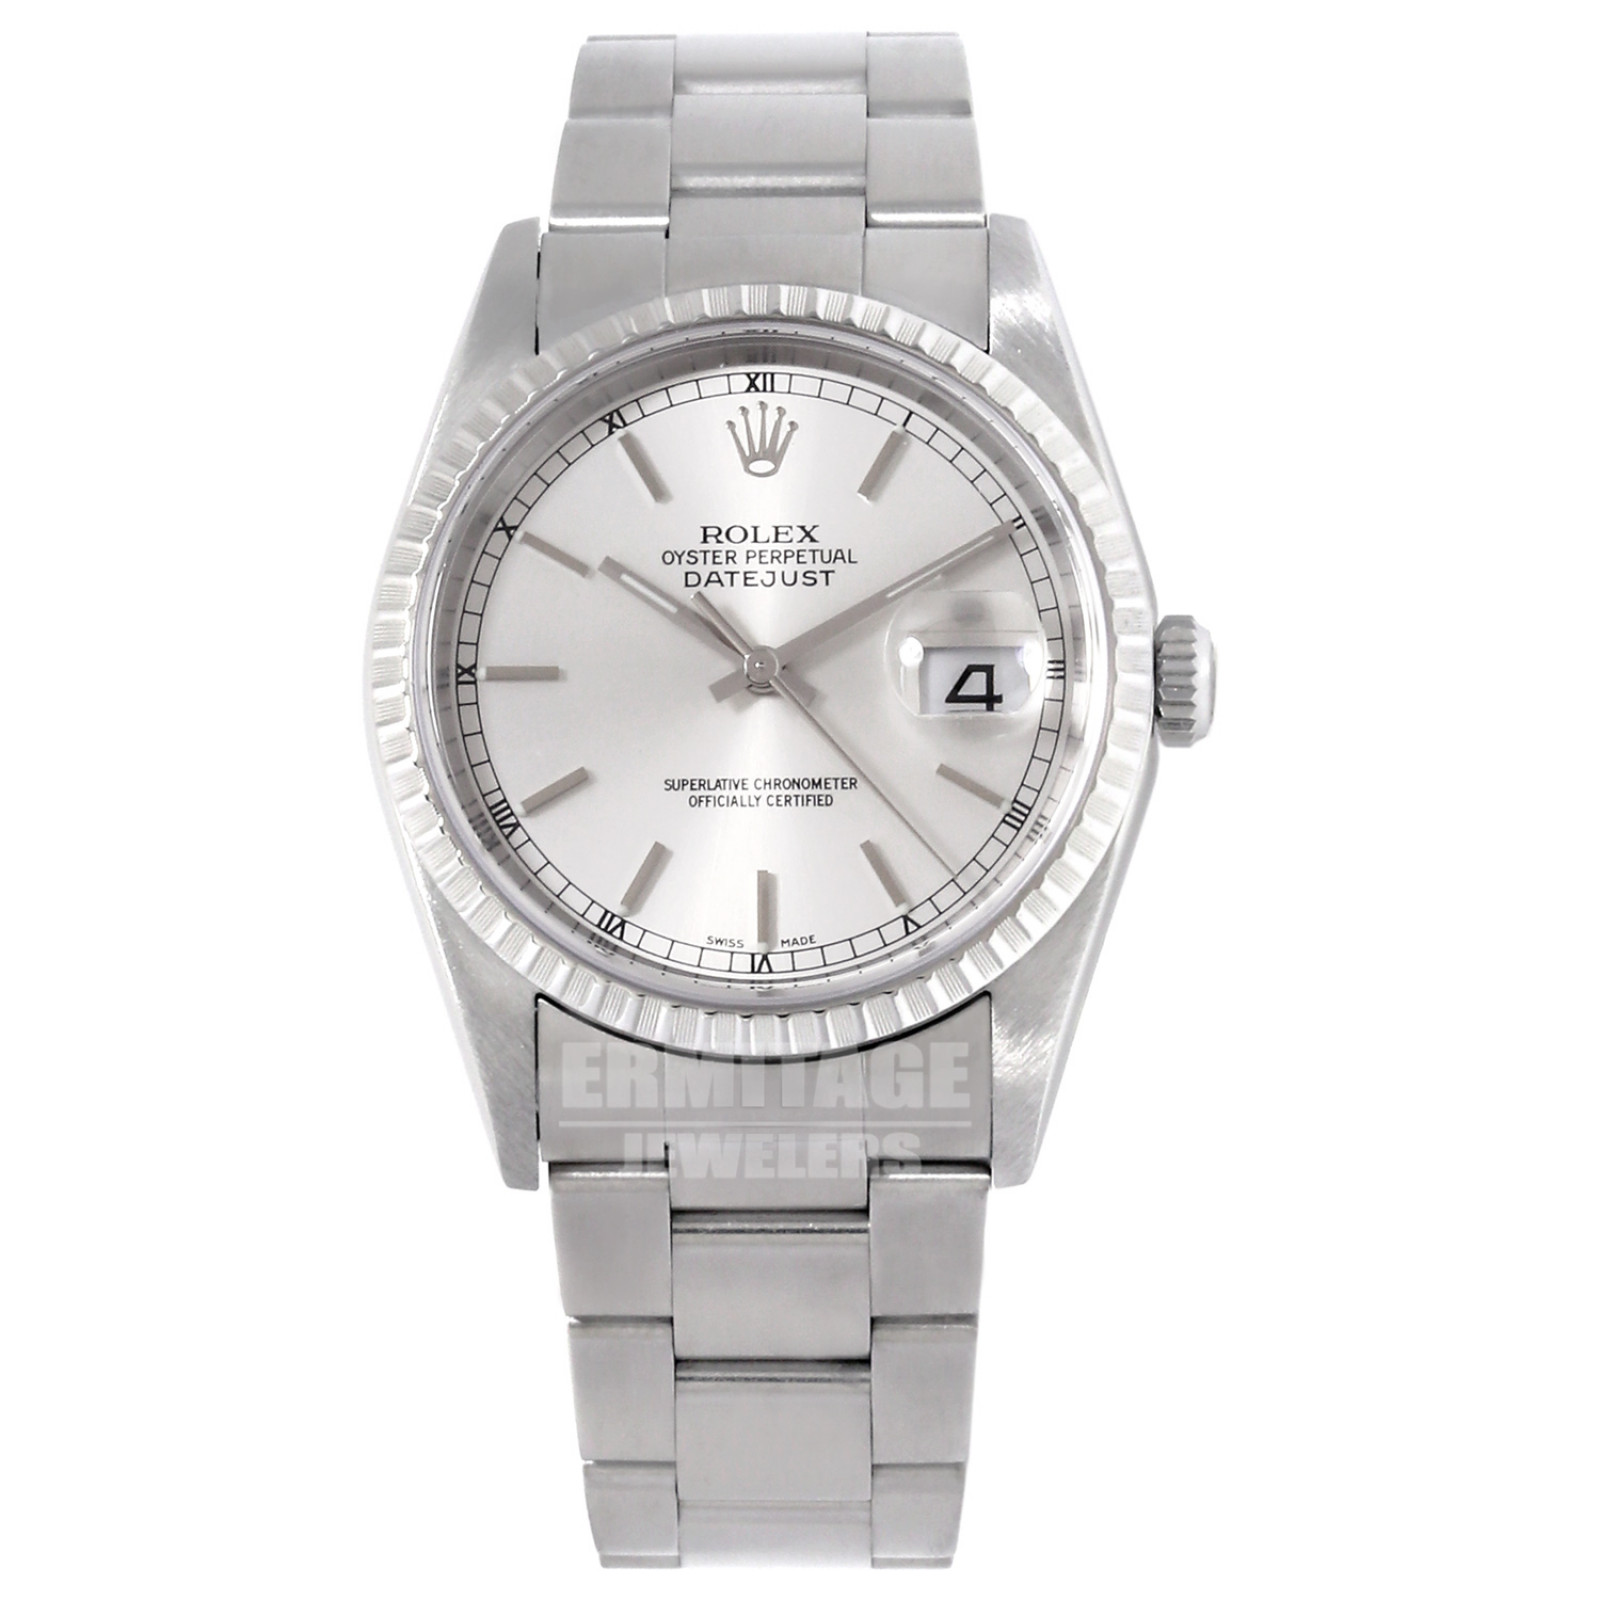 Rolex Oyster Perpetual Datejust 16220